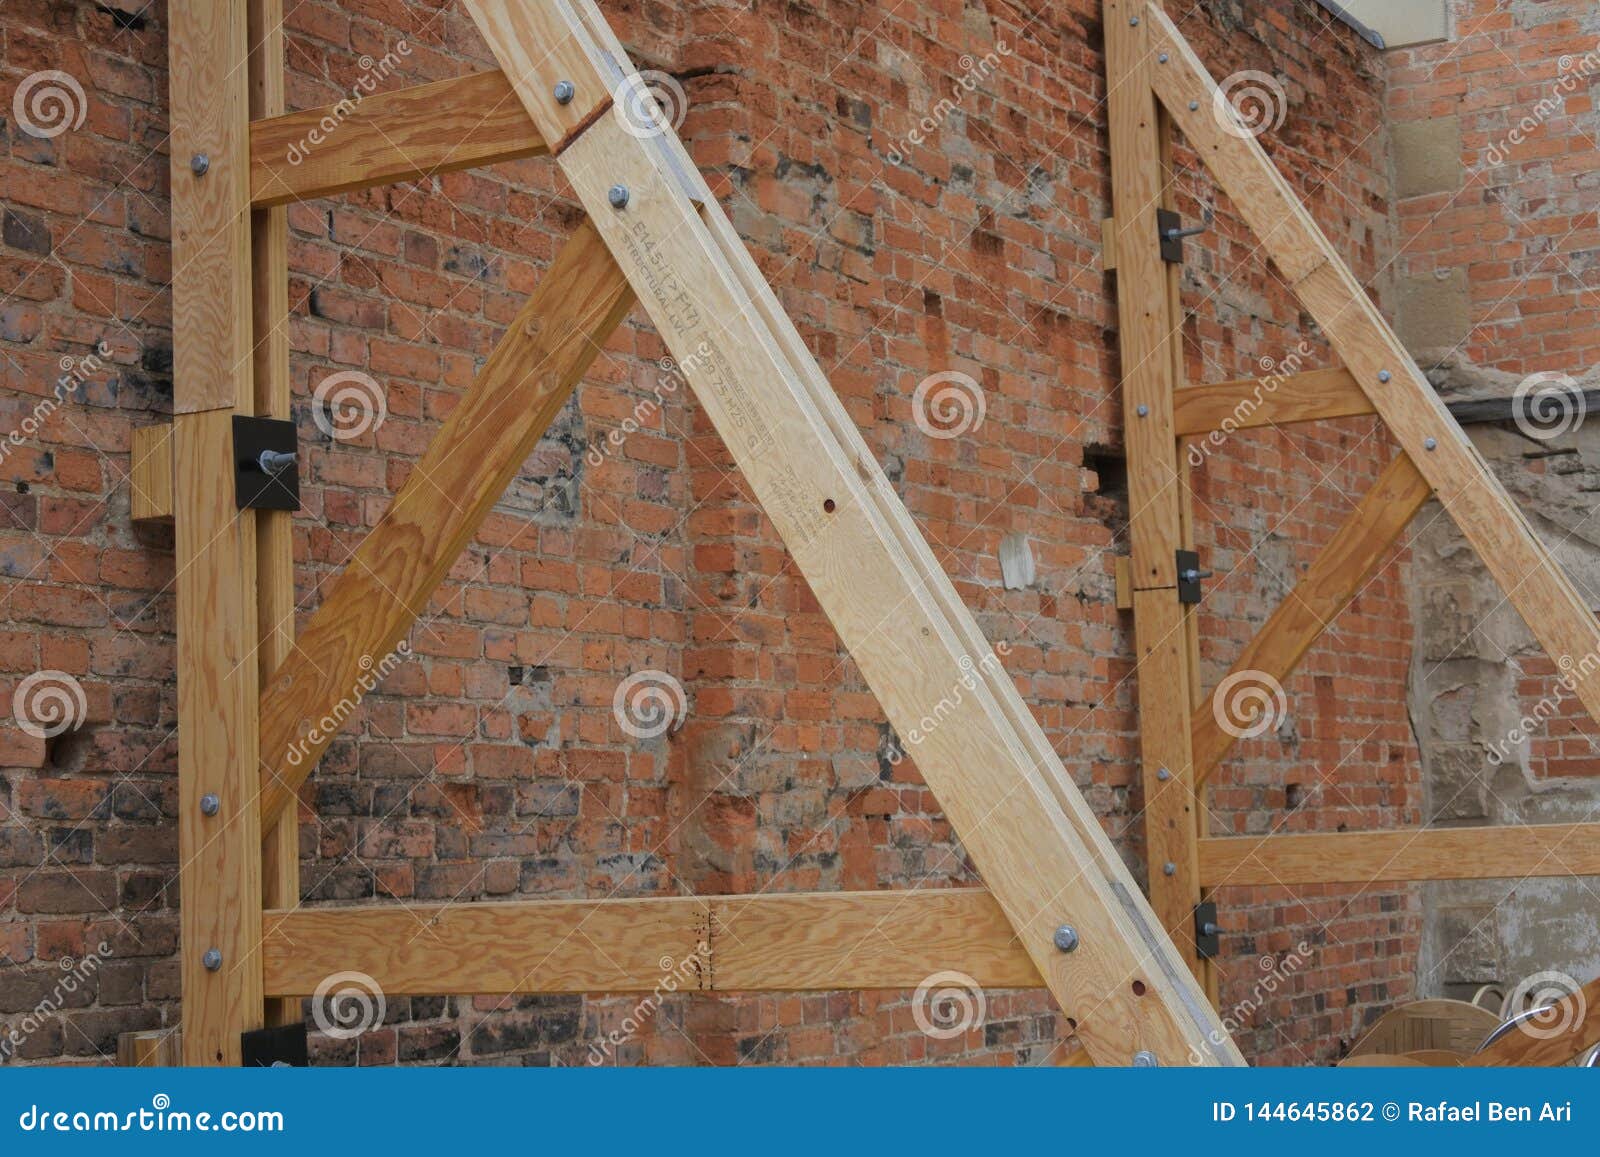 old building support formwork wall system